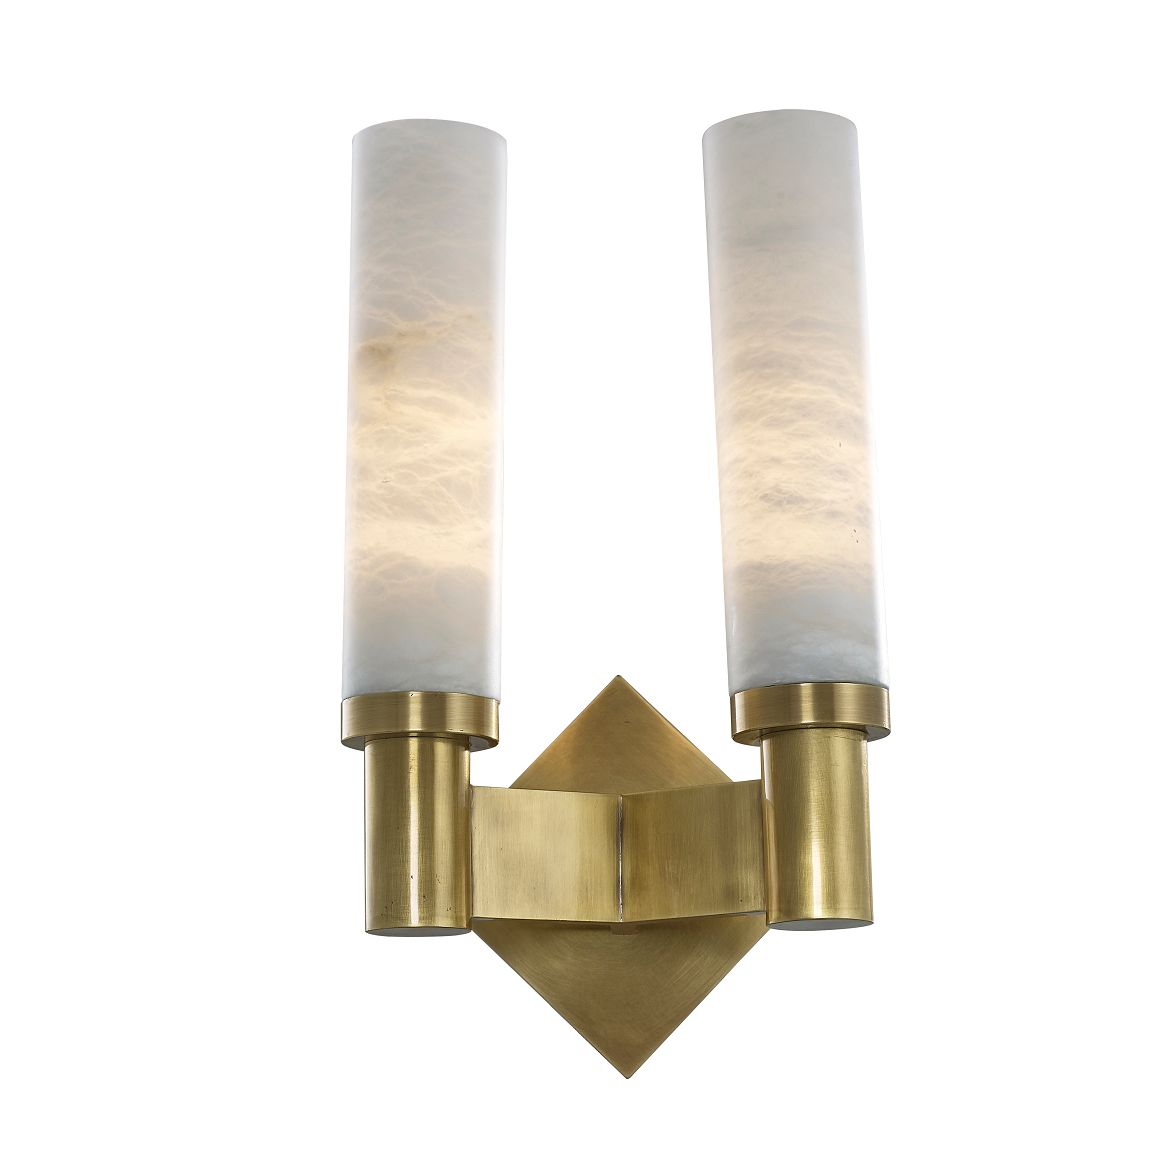 Wall lamp (Sconce) SIVERS by Romatti